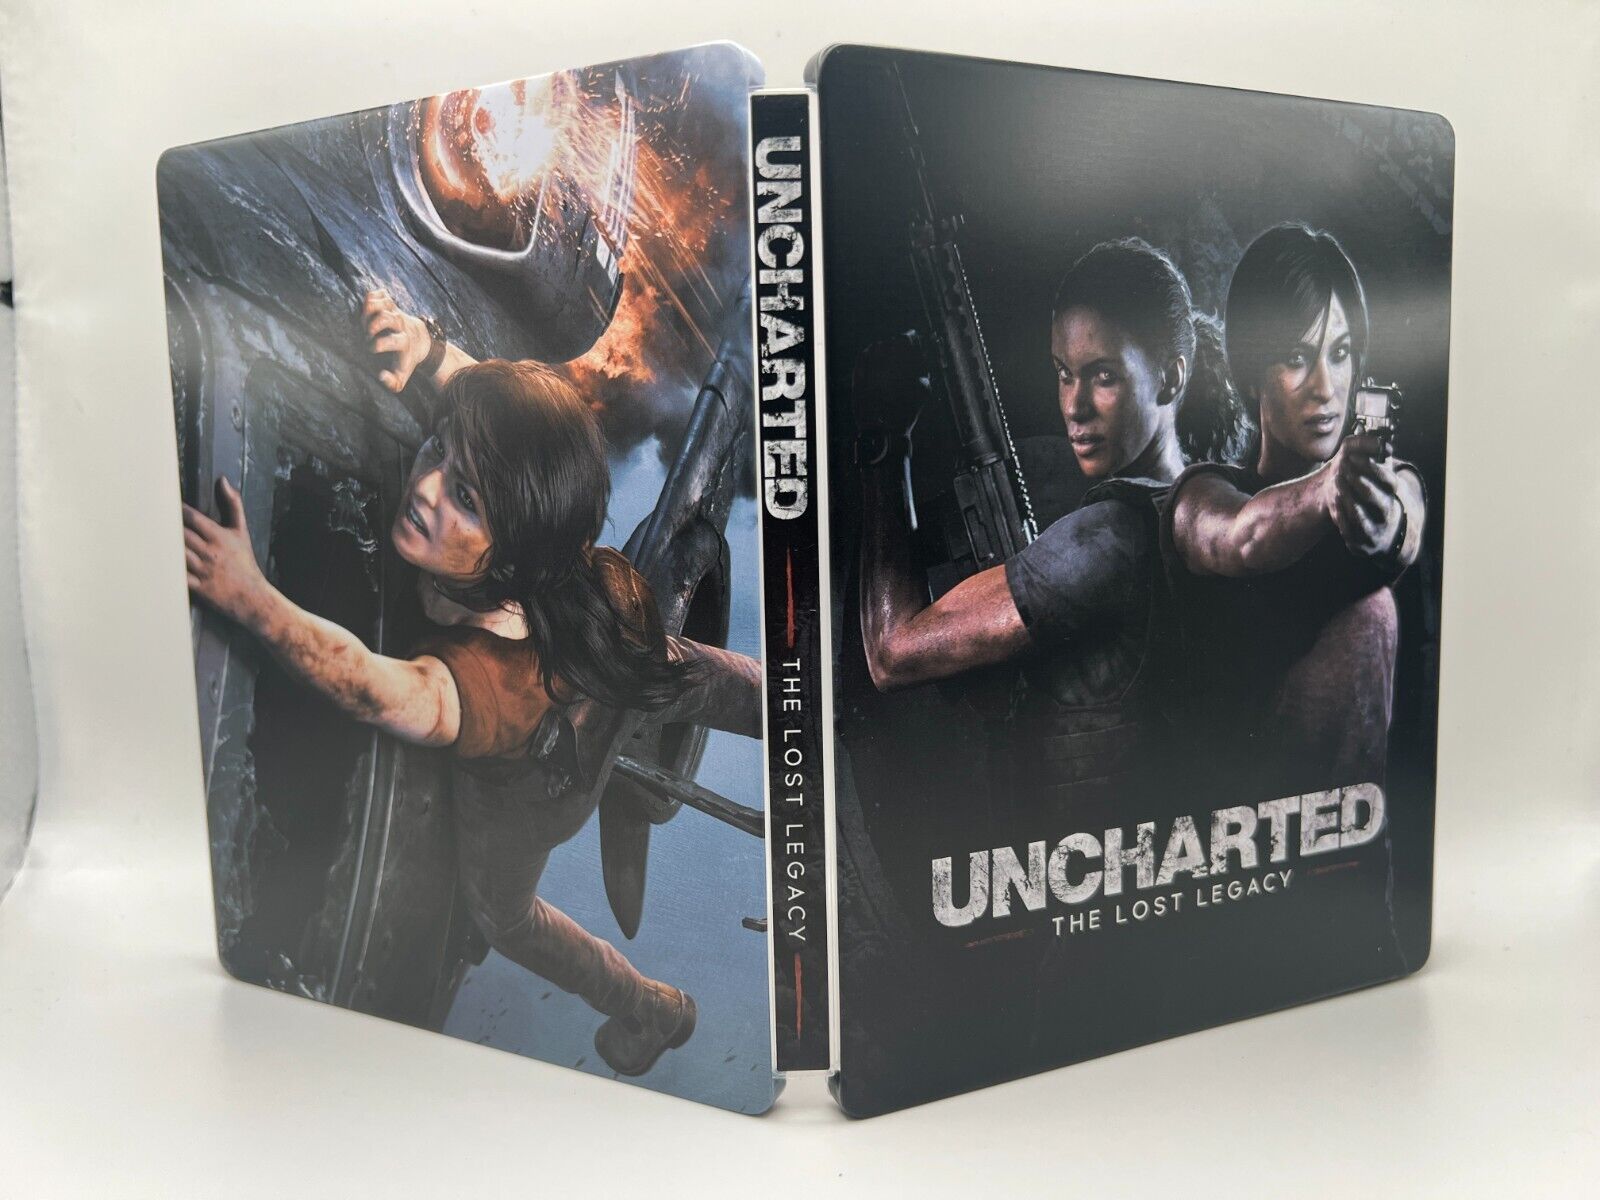 Uncharted The Lost Legacy Custom mand steelbook case (NO GAME DISC) for PS4/PS5